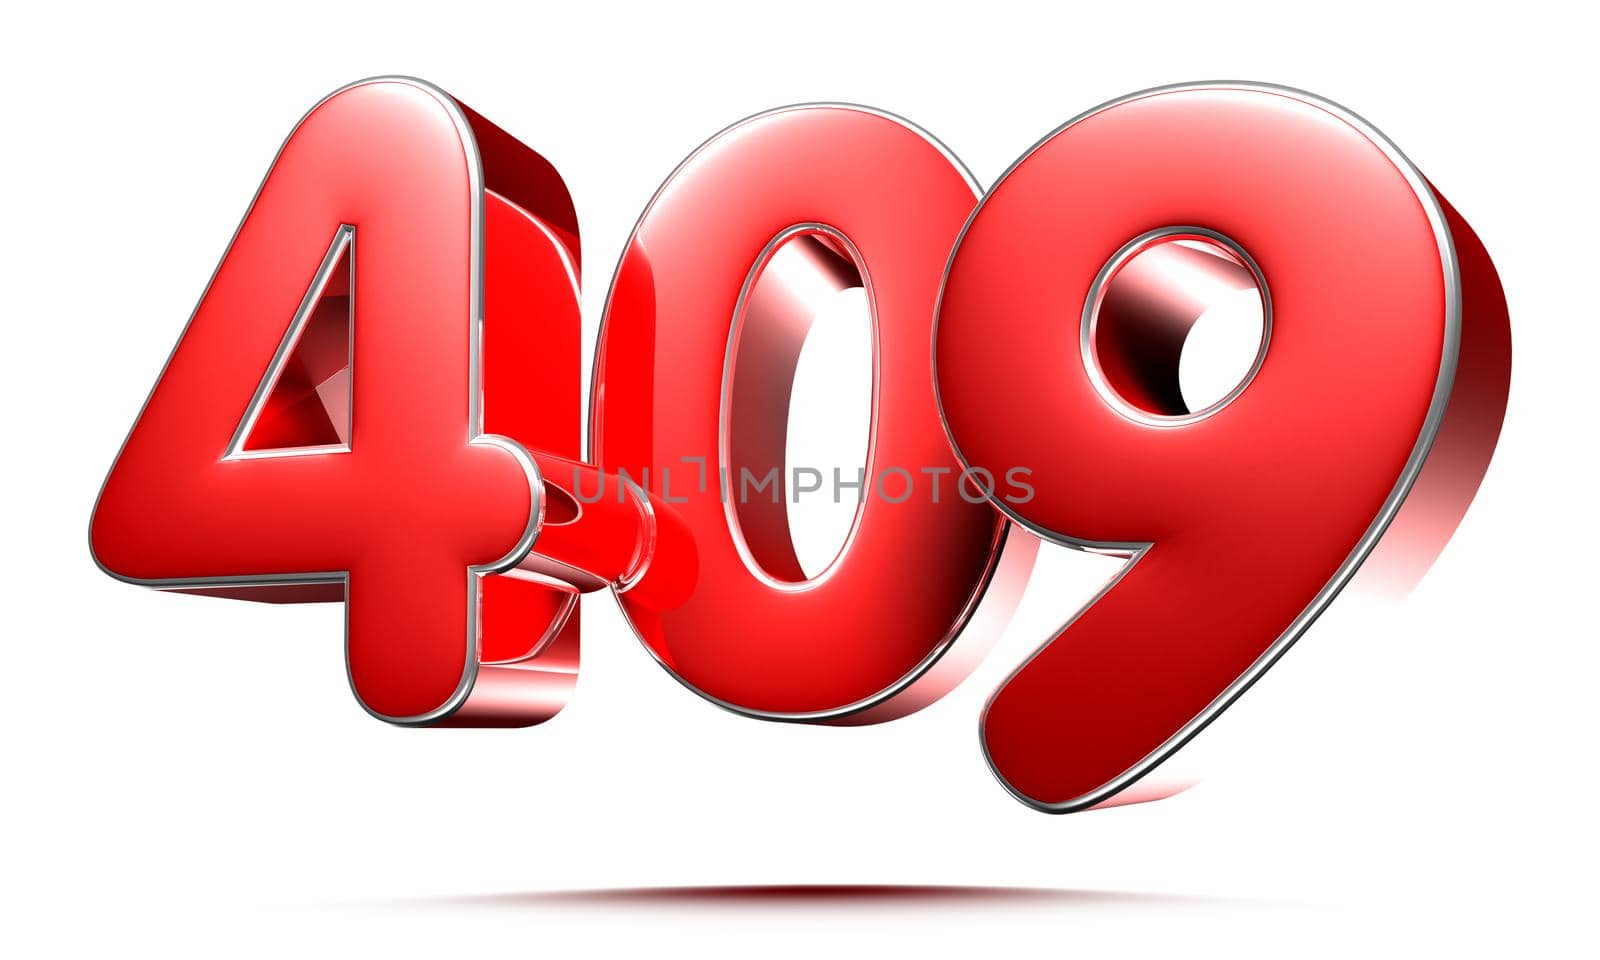 Rounded red numbers 409 on white background 3D illustration with clipping path